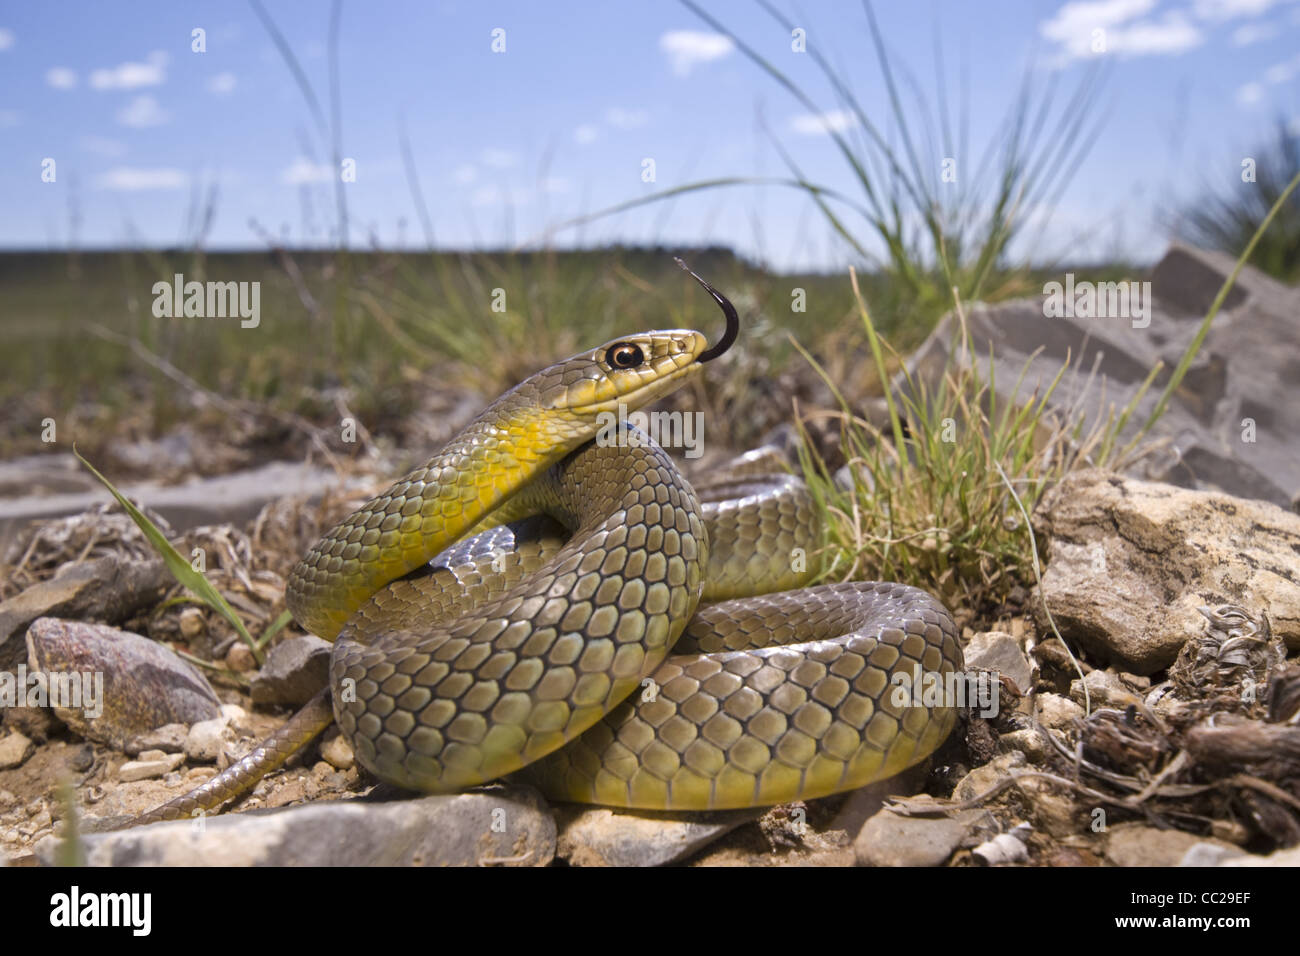 Eastern Yellow-bellied Racer, (Coluber constictor flaviventris), Kiowa National Grasslands, Harding county, New Mexico. Stock Photo